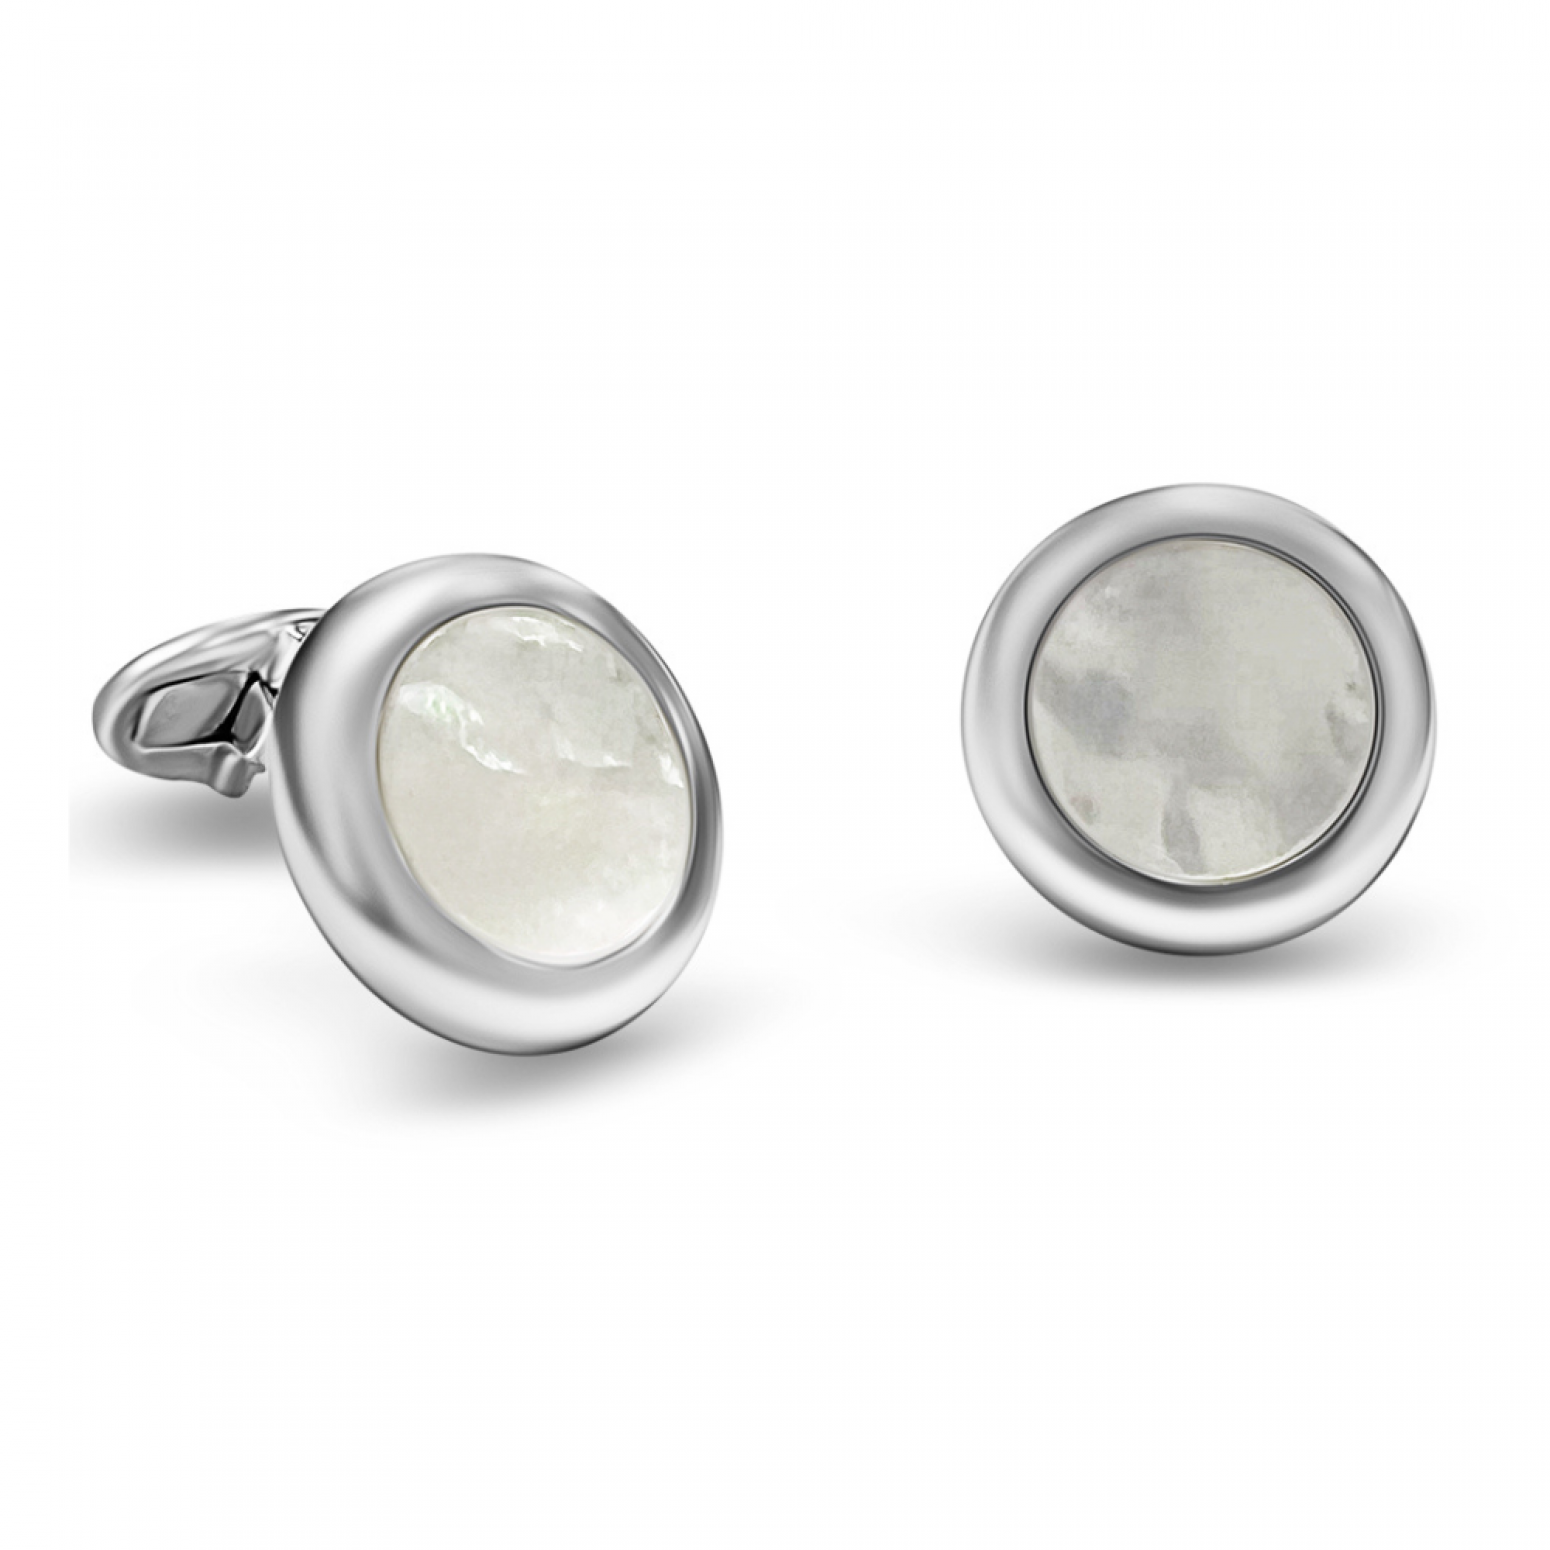 Cufflinks, 14K white gold with mother of pearl, mk0228 GIFTS Κοσμηματα - chrilia.gr